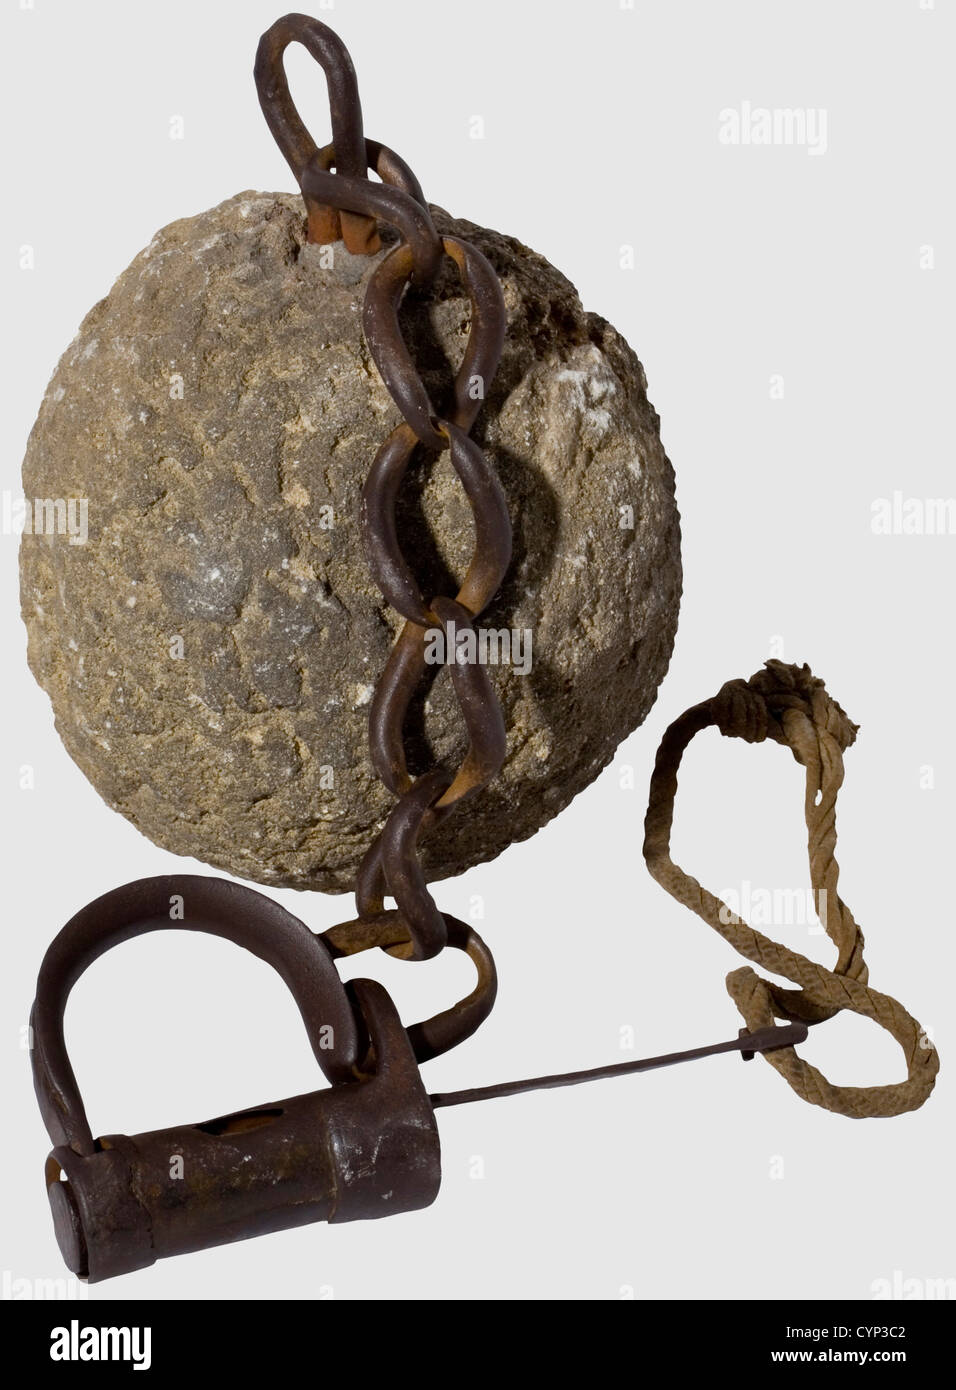 A heavy ball and chain, Austrian, ca. 1600. The strong forged iron chain consisting of five links, attached iron shackle lock with sliding key, the large limestone ball roughly worked. Diameter of the ball 22 cm. Rare, early forensic or inquisition instrument, historic, historical,, 17th century, instrument of torture, torture device, instruments of torture, torture devices, object, objects, stills, clipping, clippings, cut out, cut-out, cut-outs, Additional-Rights-Clearences-Not Available Stock Photo